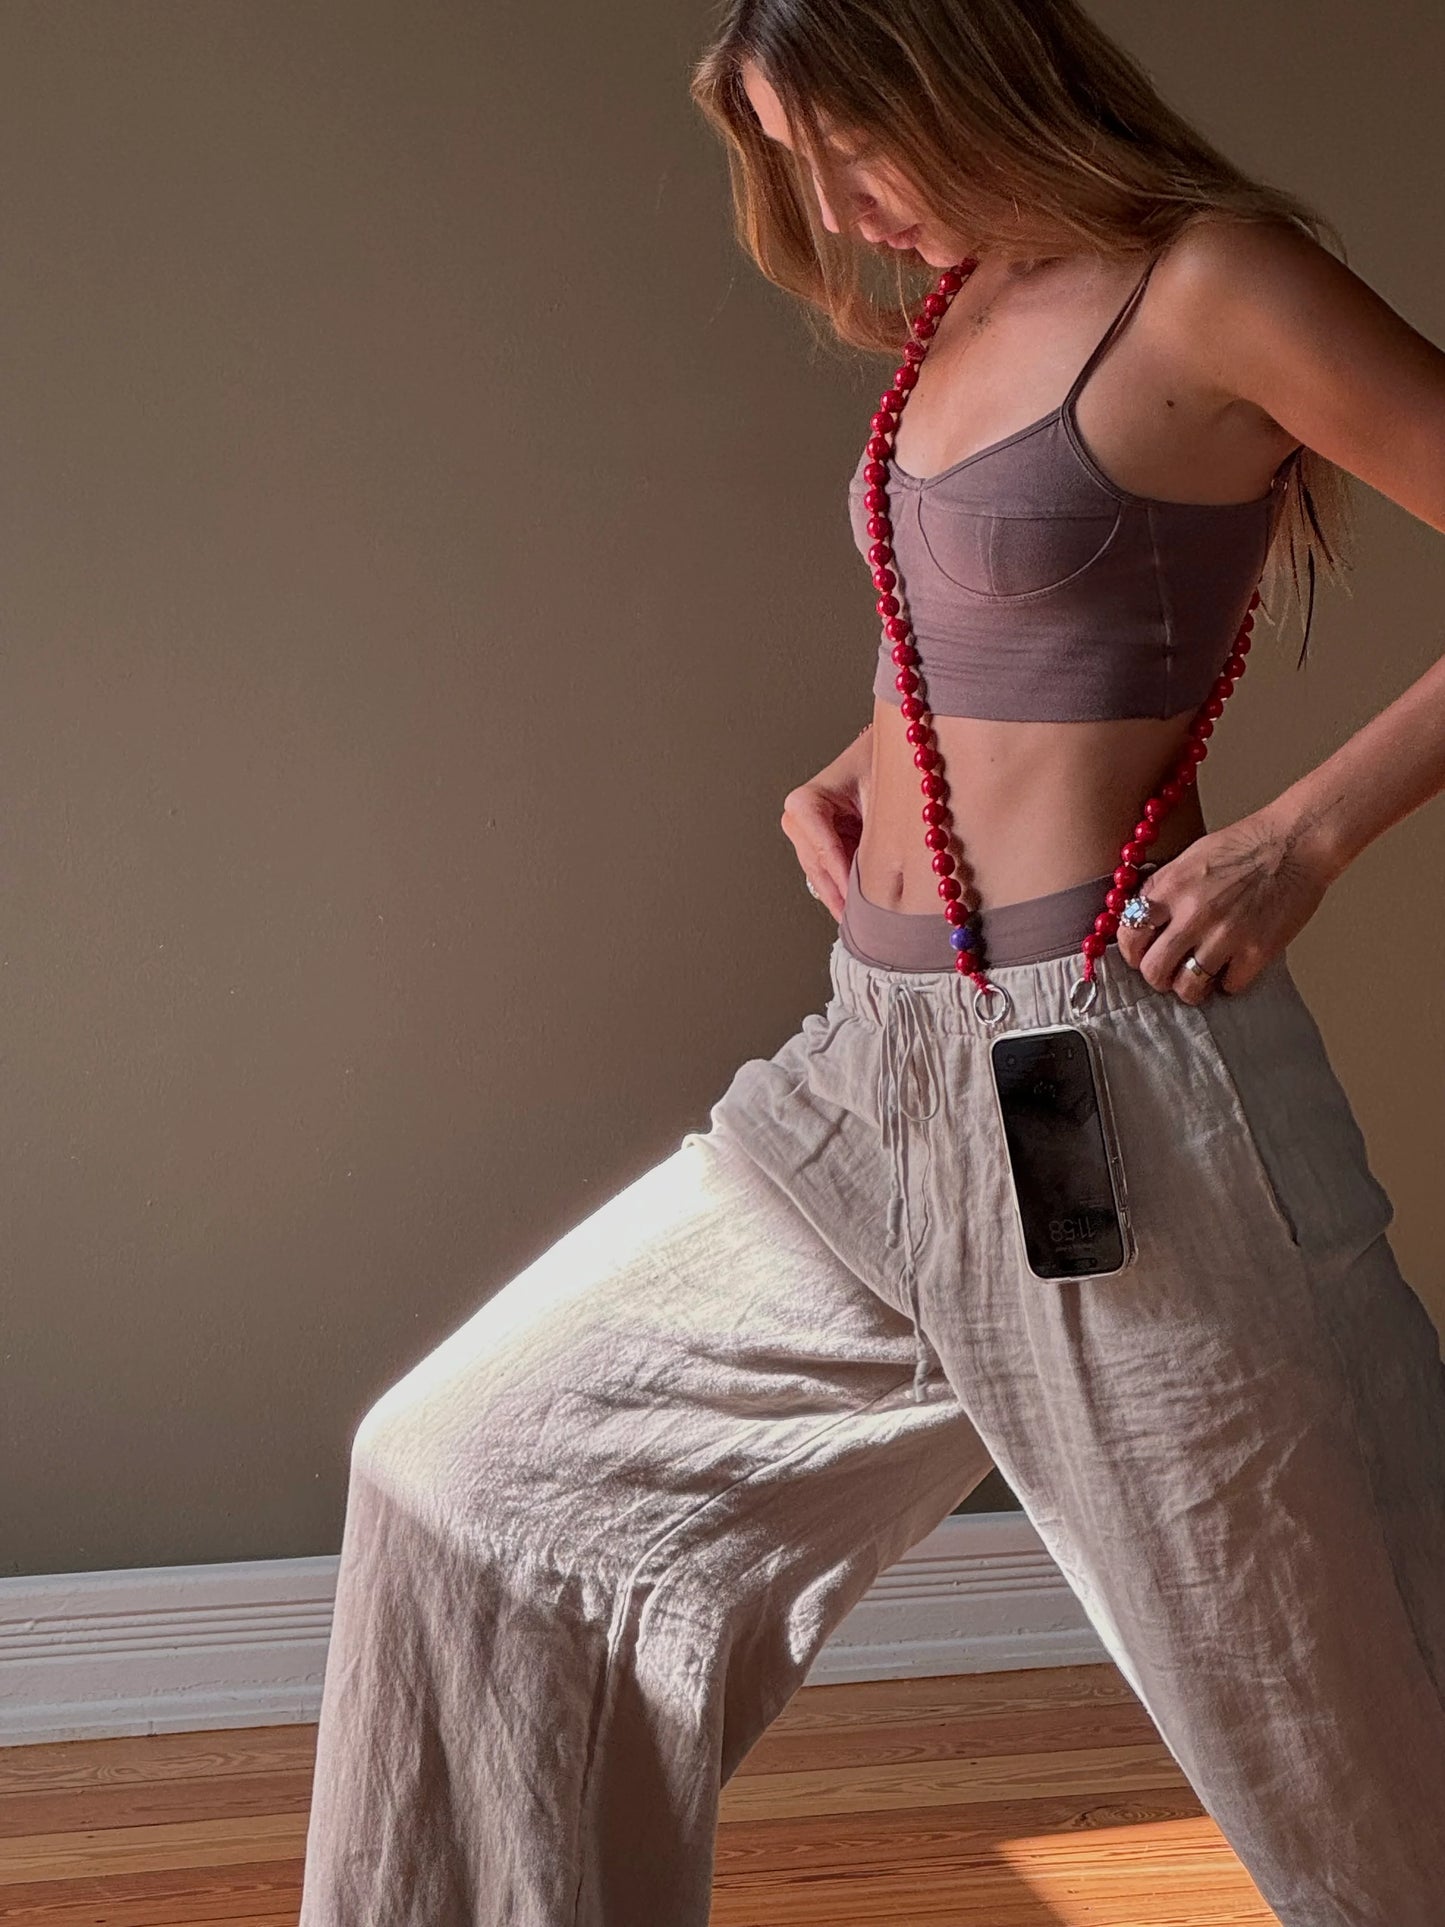 model Sina is wearing a crossbody simply red upbeads cellphone chain while practising yoga